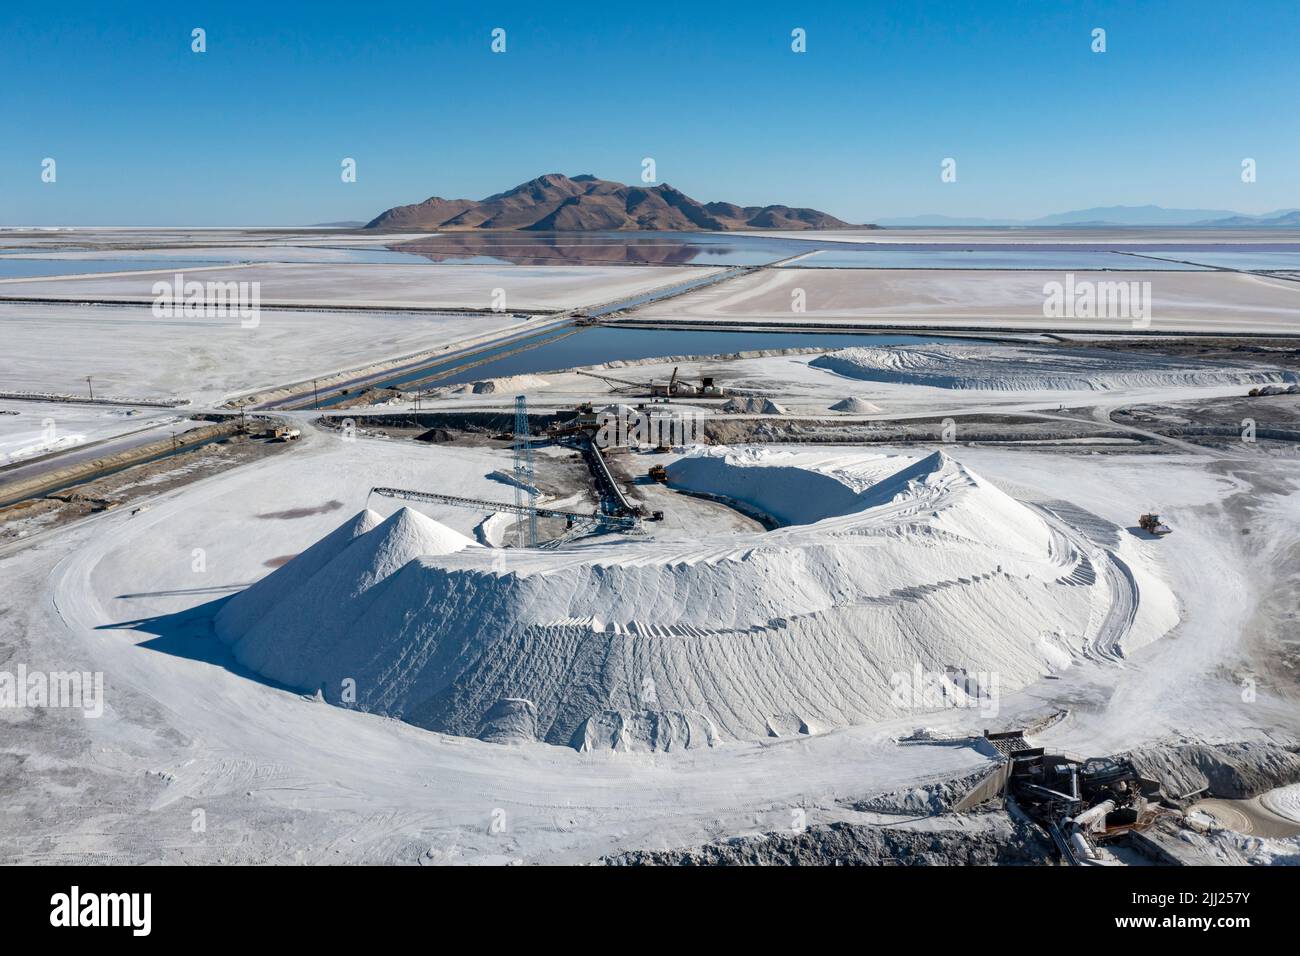 Grantsville, Utah - The Morton Salt facility, where salt is produced by impounding brine in shallow evaporation ponds at the edge of Great Salt Lake. Stock Photo